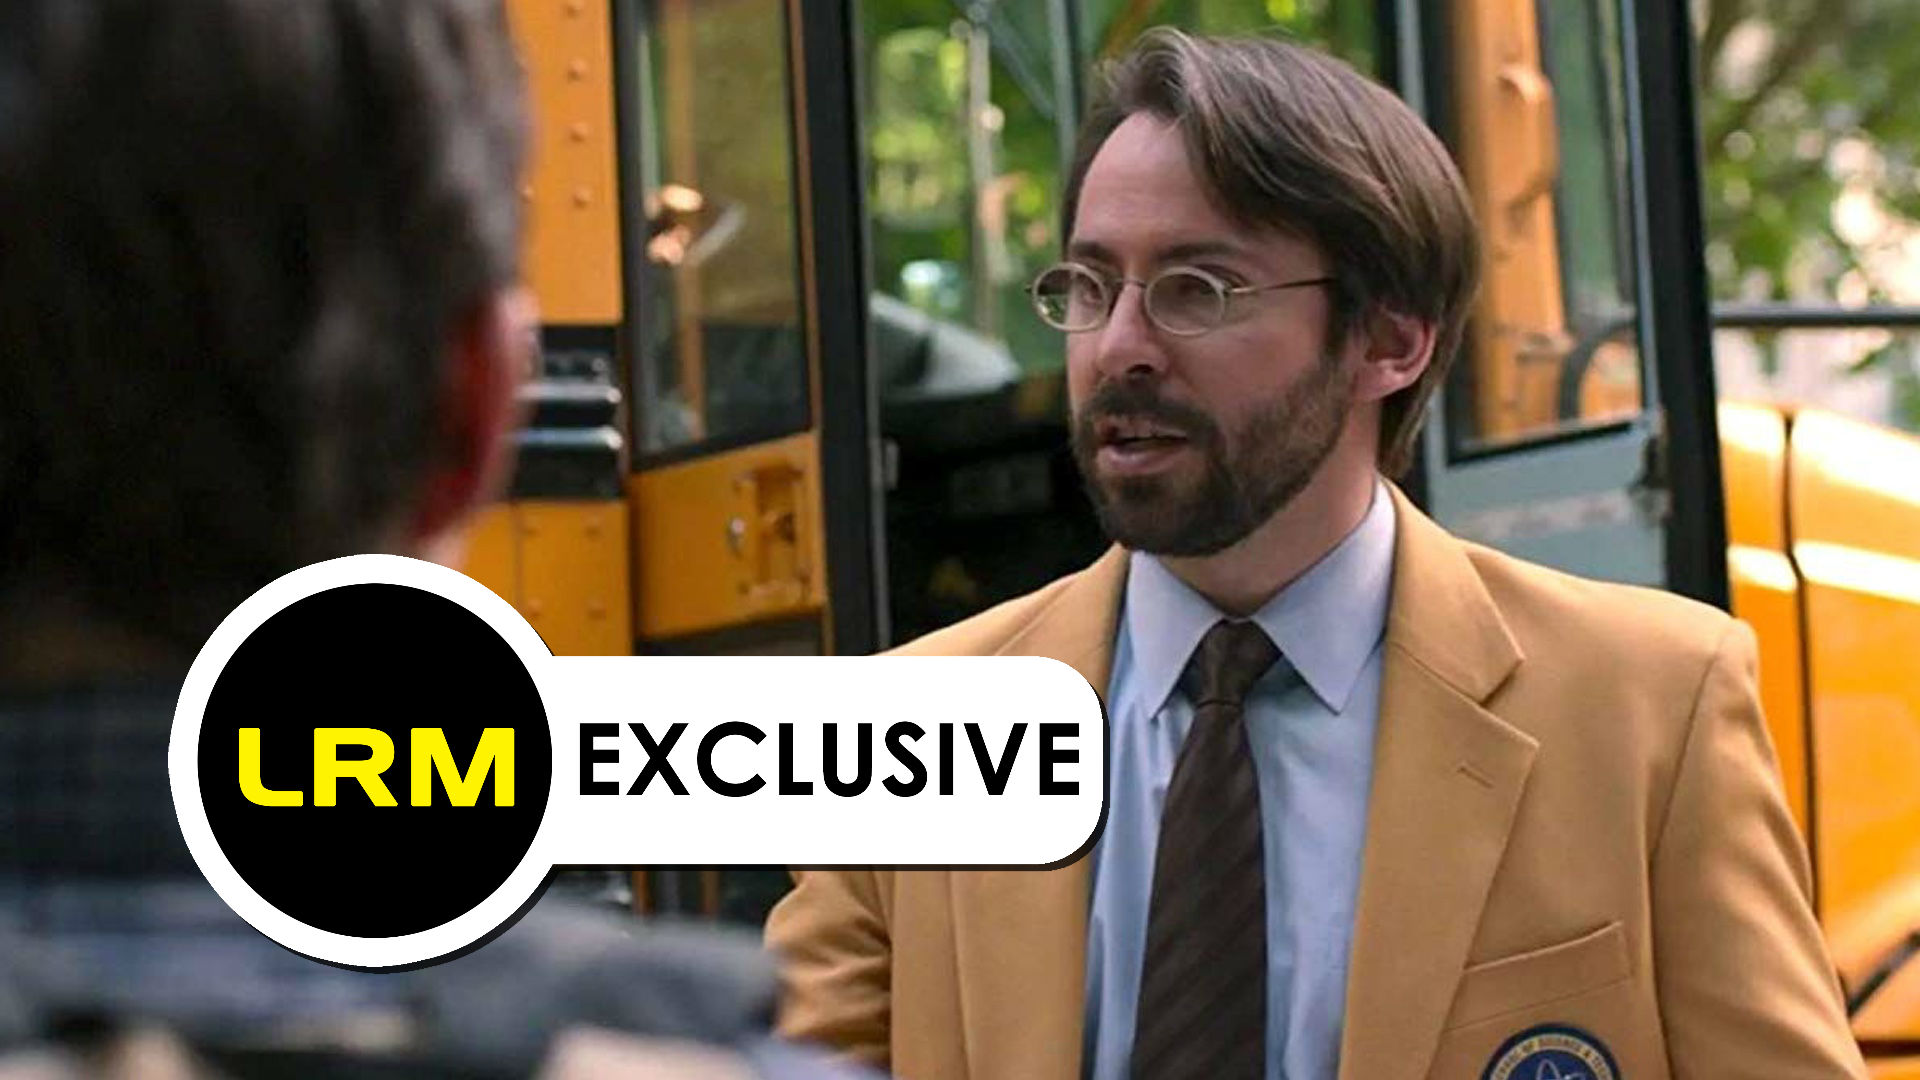 Spider-Man: Far From Home’s Martin Starr Did Not Know His Incredible Hulk Character Was Connected (Exclusive)